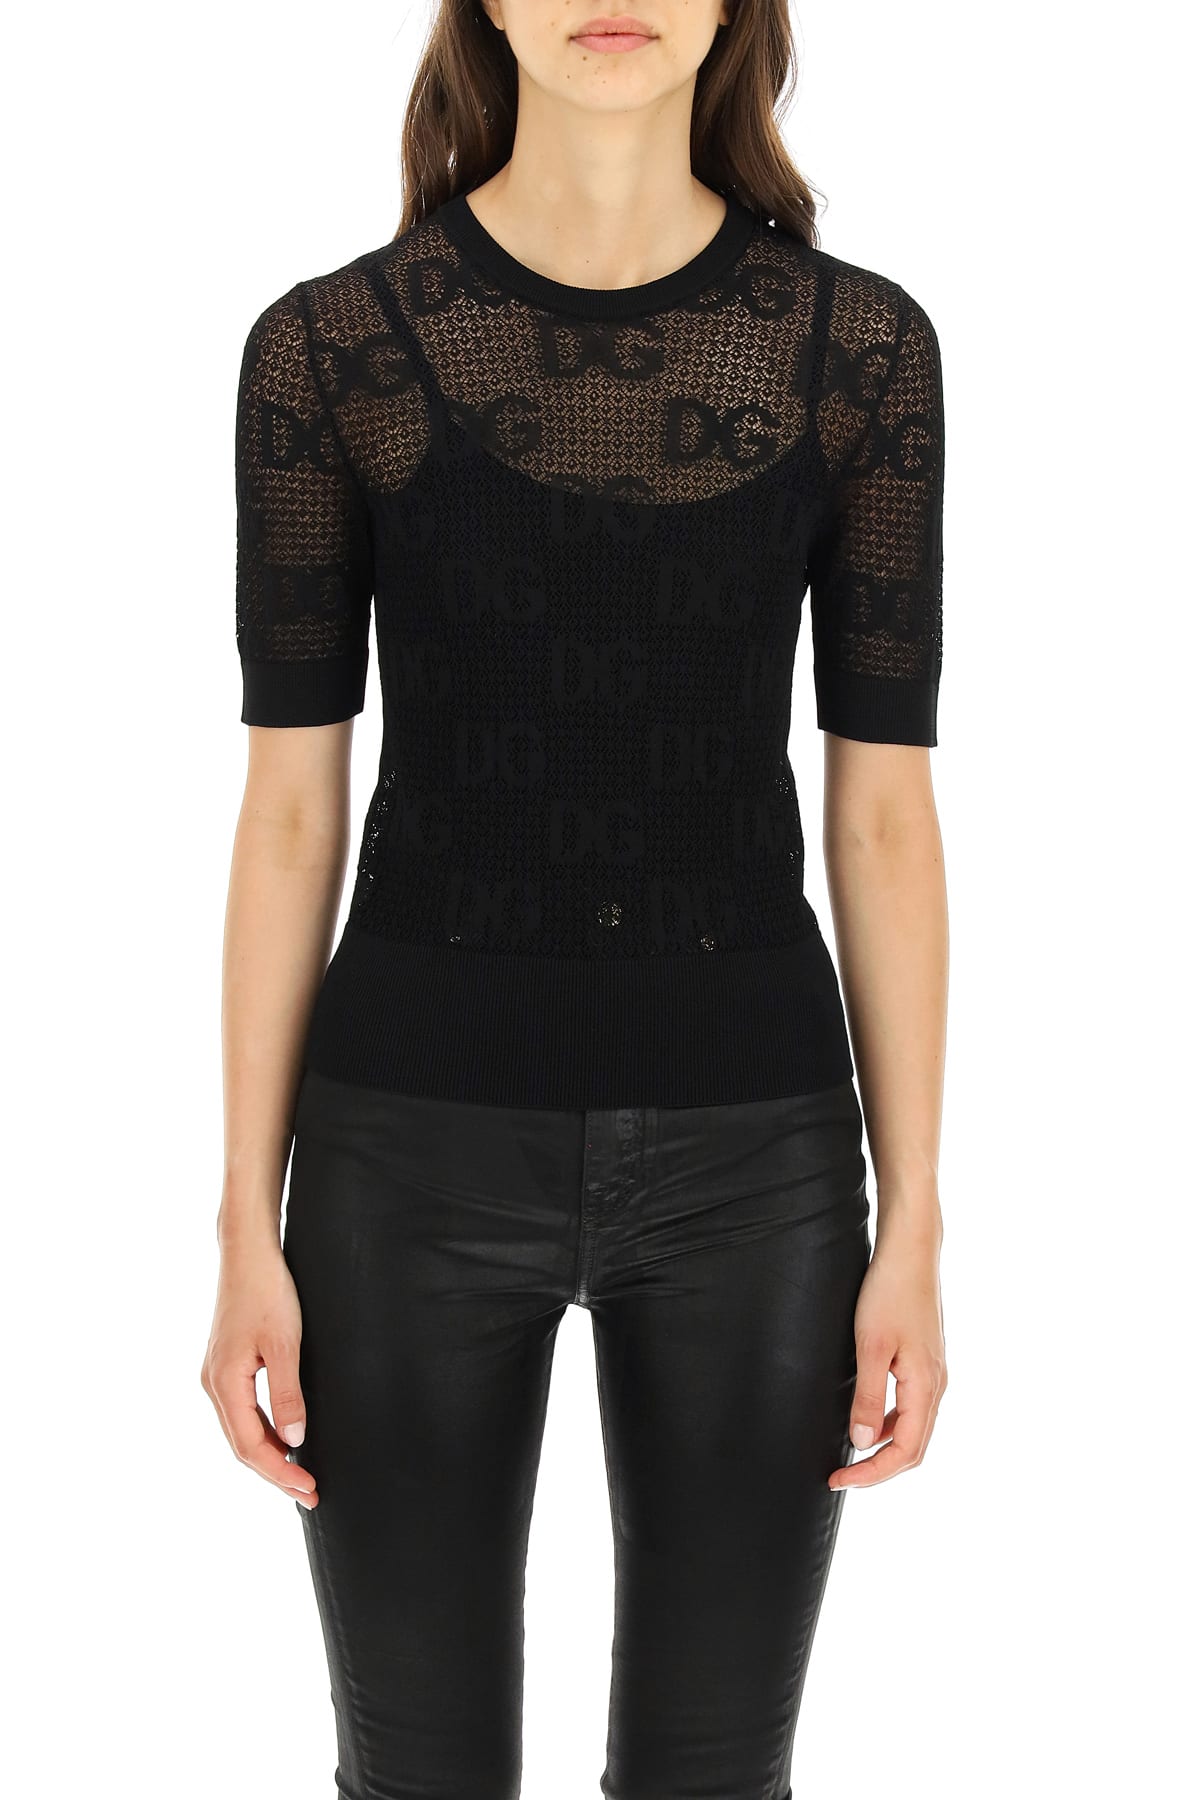 Dolce & Gabbana Open Work Top With Jacquard Logo